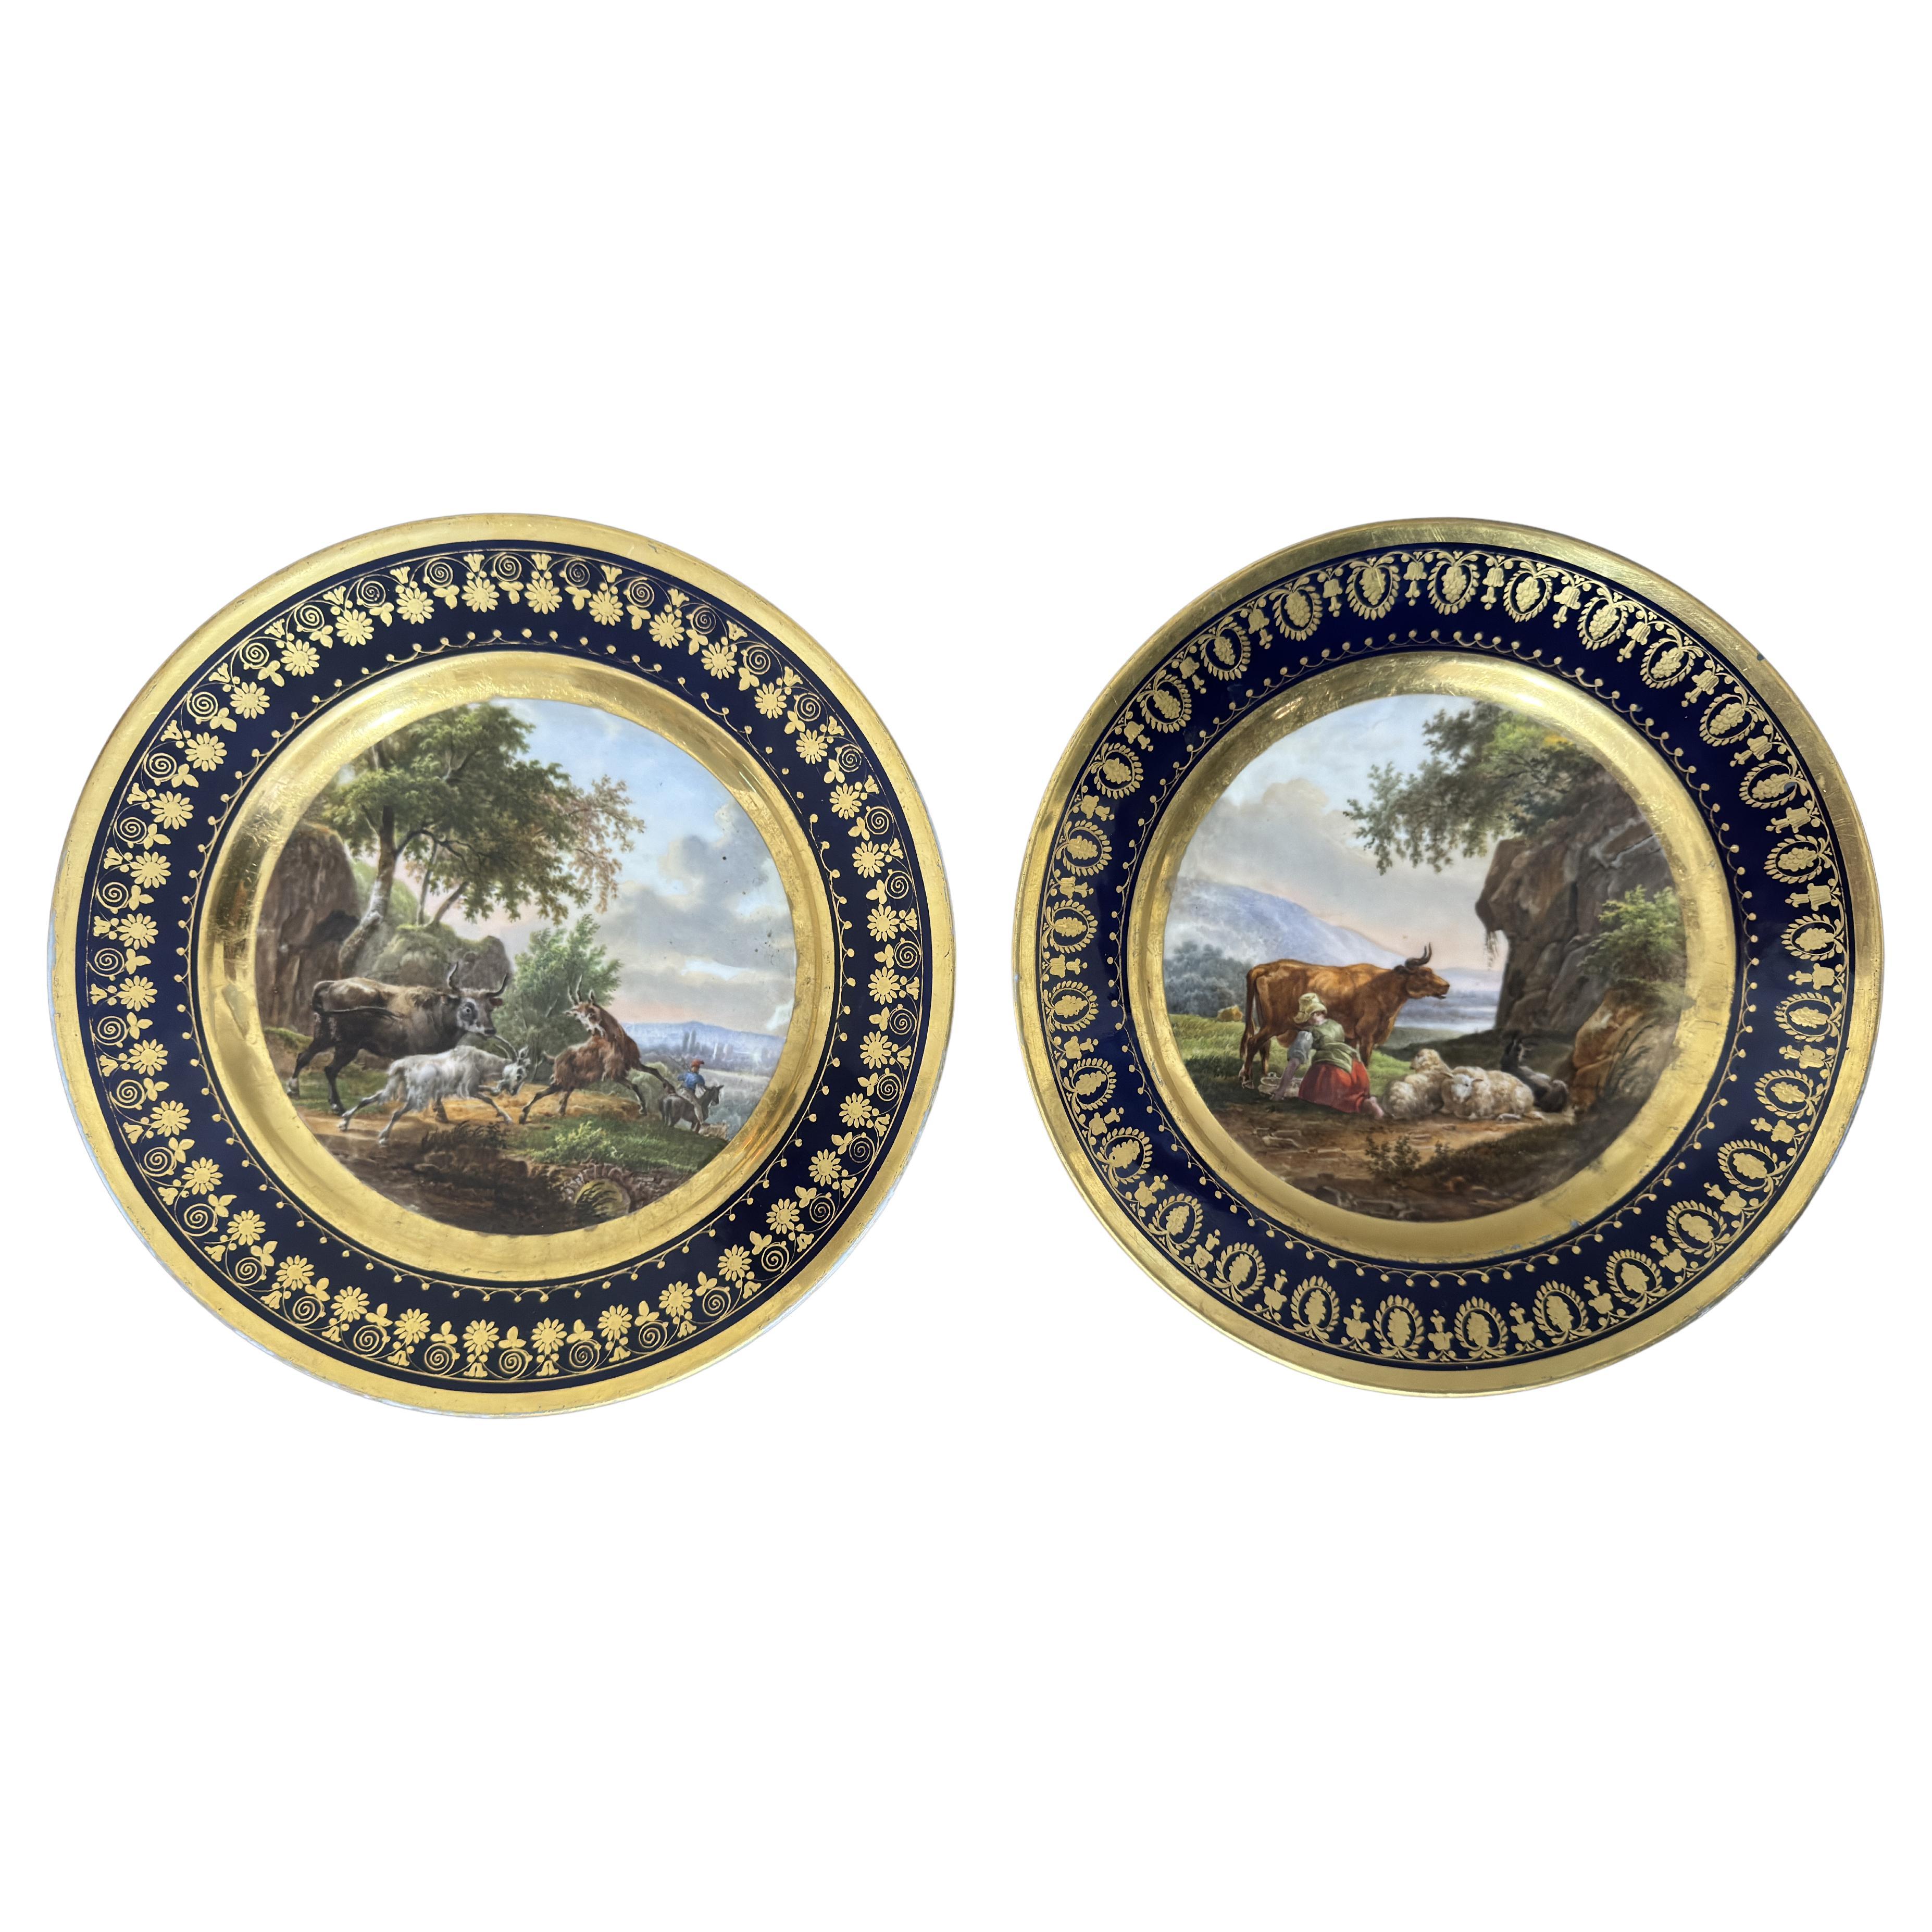 Pair of Early 19th Century Darte Brothers Porcelain Plates For Sale